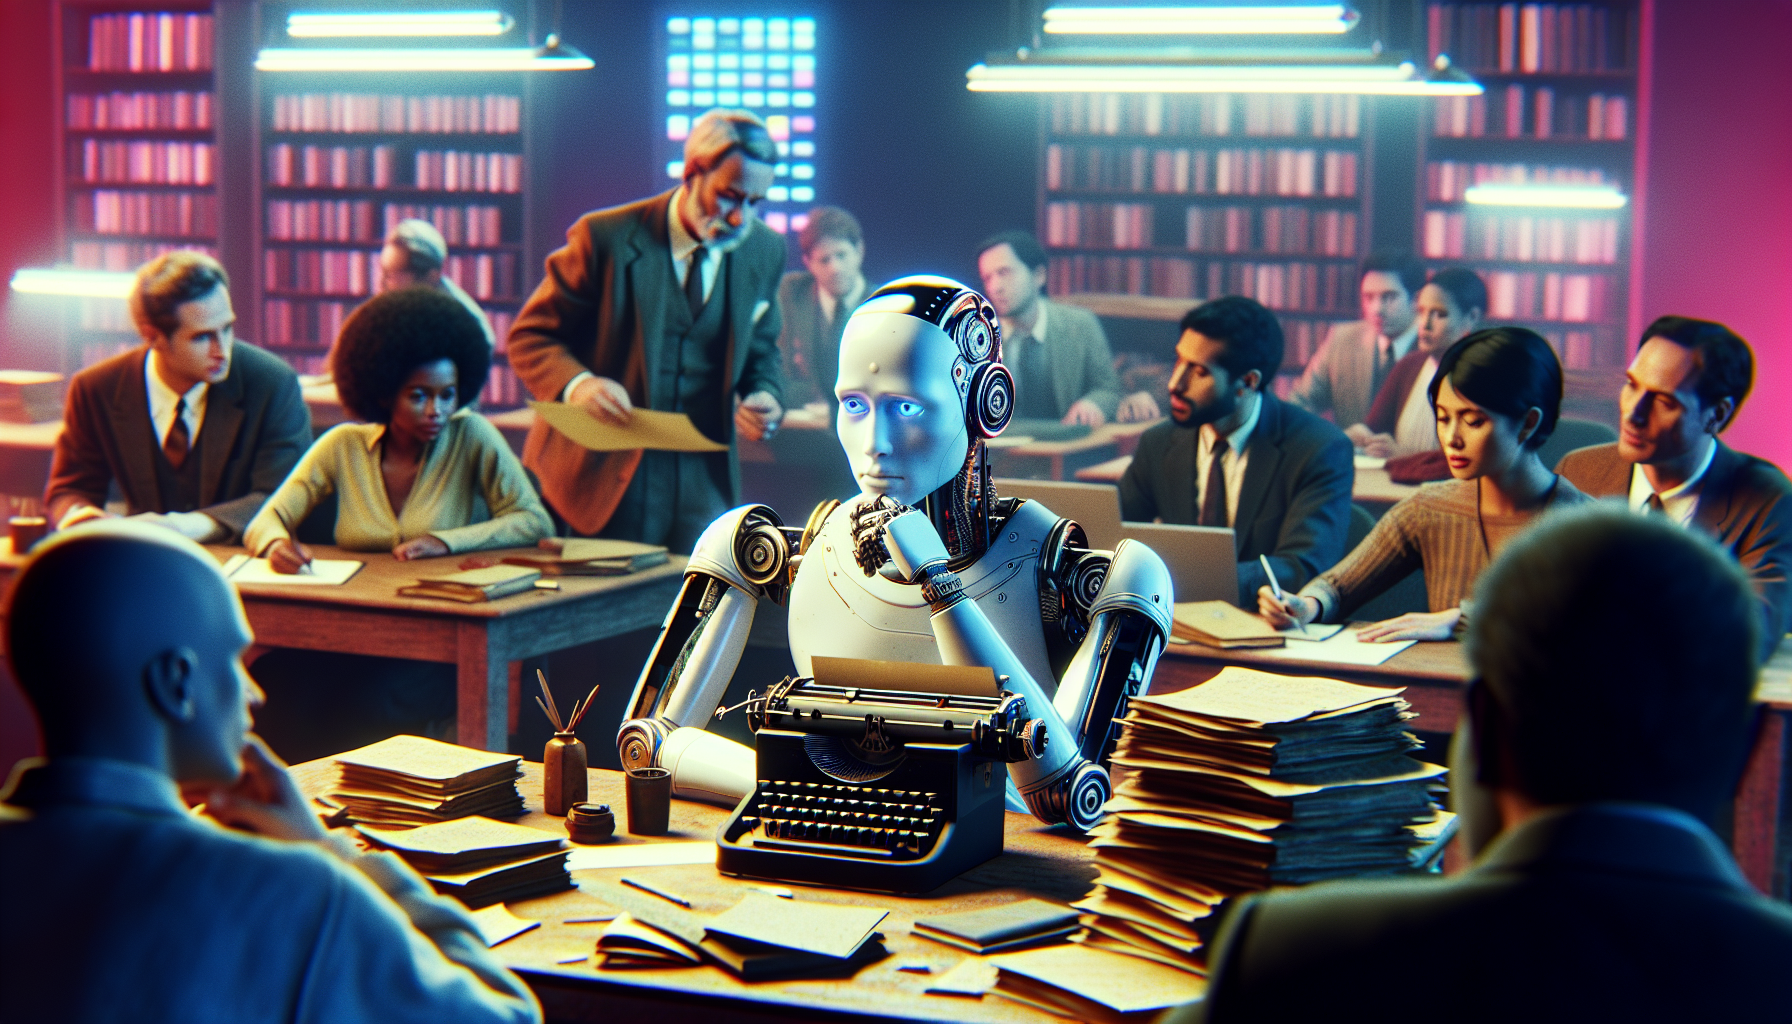 A futuristic scene depicting a humanoid robot sitting at a cluttered desk filled with film scripts and a vintage typewriter, with a frustrated expression while a group of human screenwriters discuss i